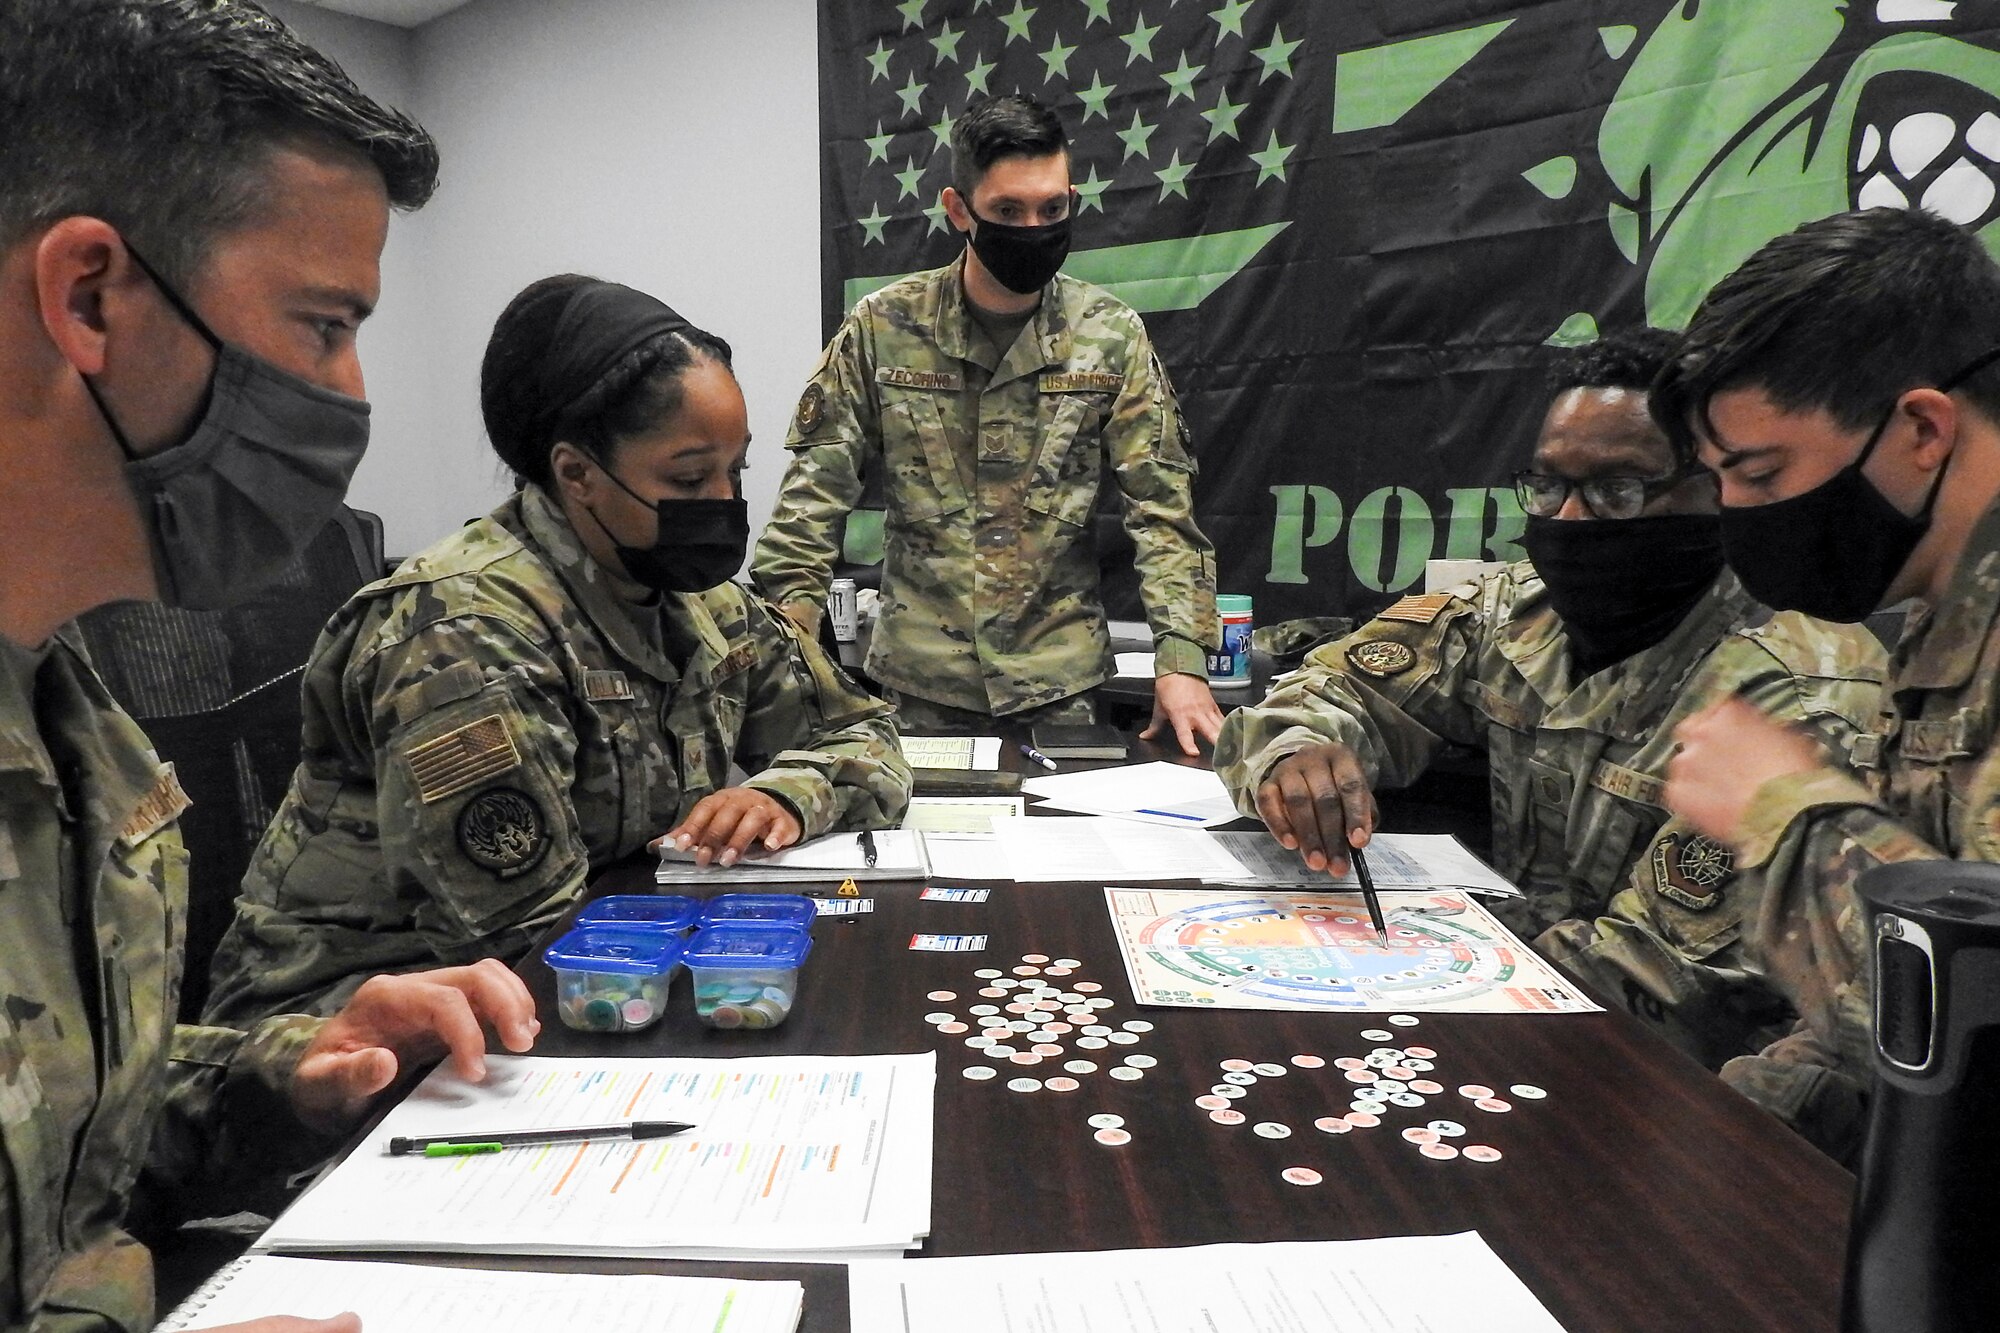 Airmen from various units within the 621st Contingency Response Wing play a prototype military strategy game March 26, 2021, at Travis Air Force Base, California. The game is called “Kingfish ACE” and focuses on real-world responses for Air Force leadership. (U.S. Air Force photo by Senior Airman Chad Kotce)